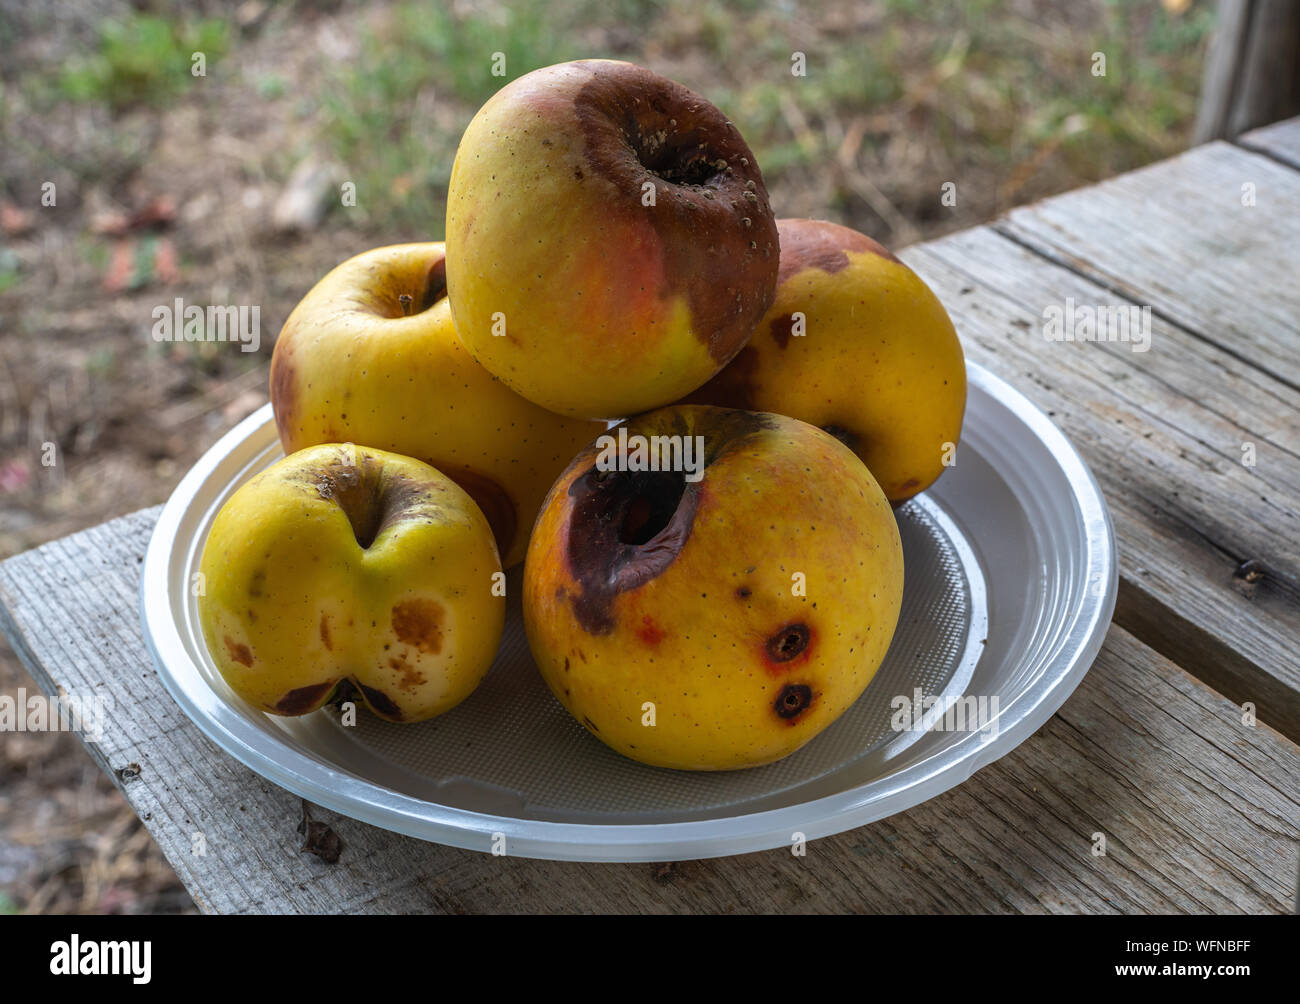 Plastic plate with rotten apples Stock Photo